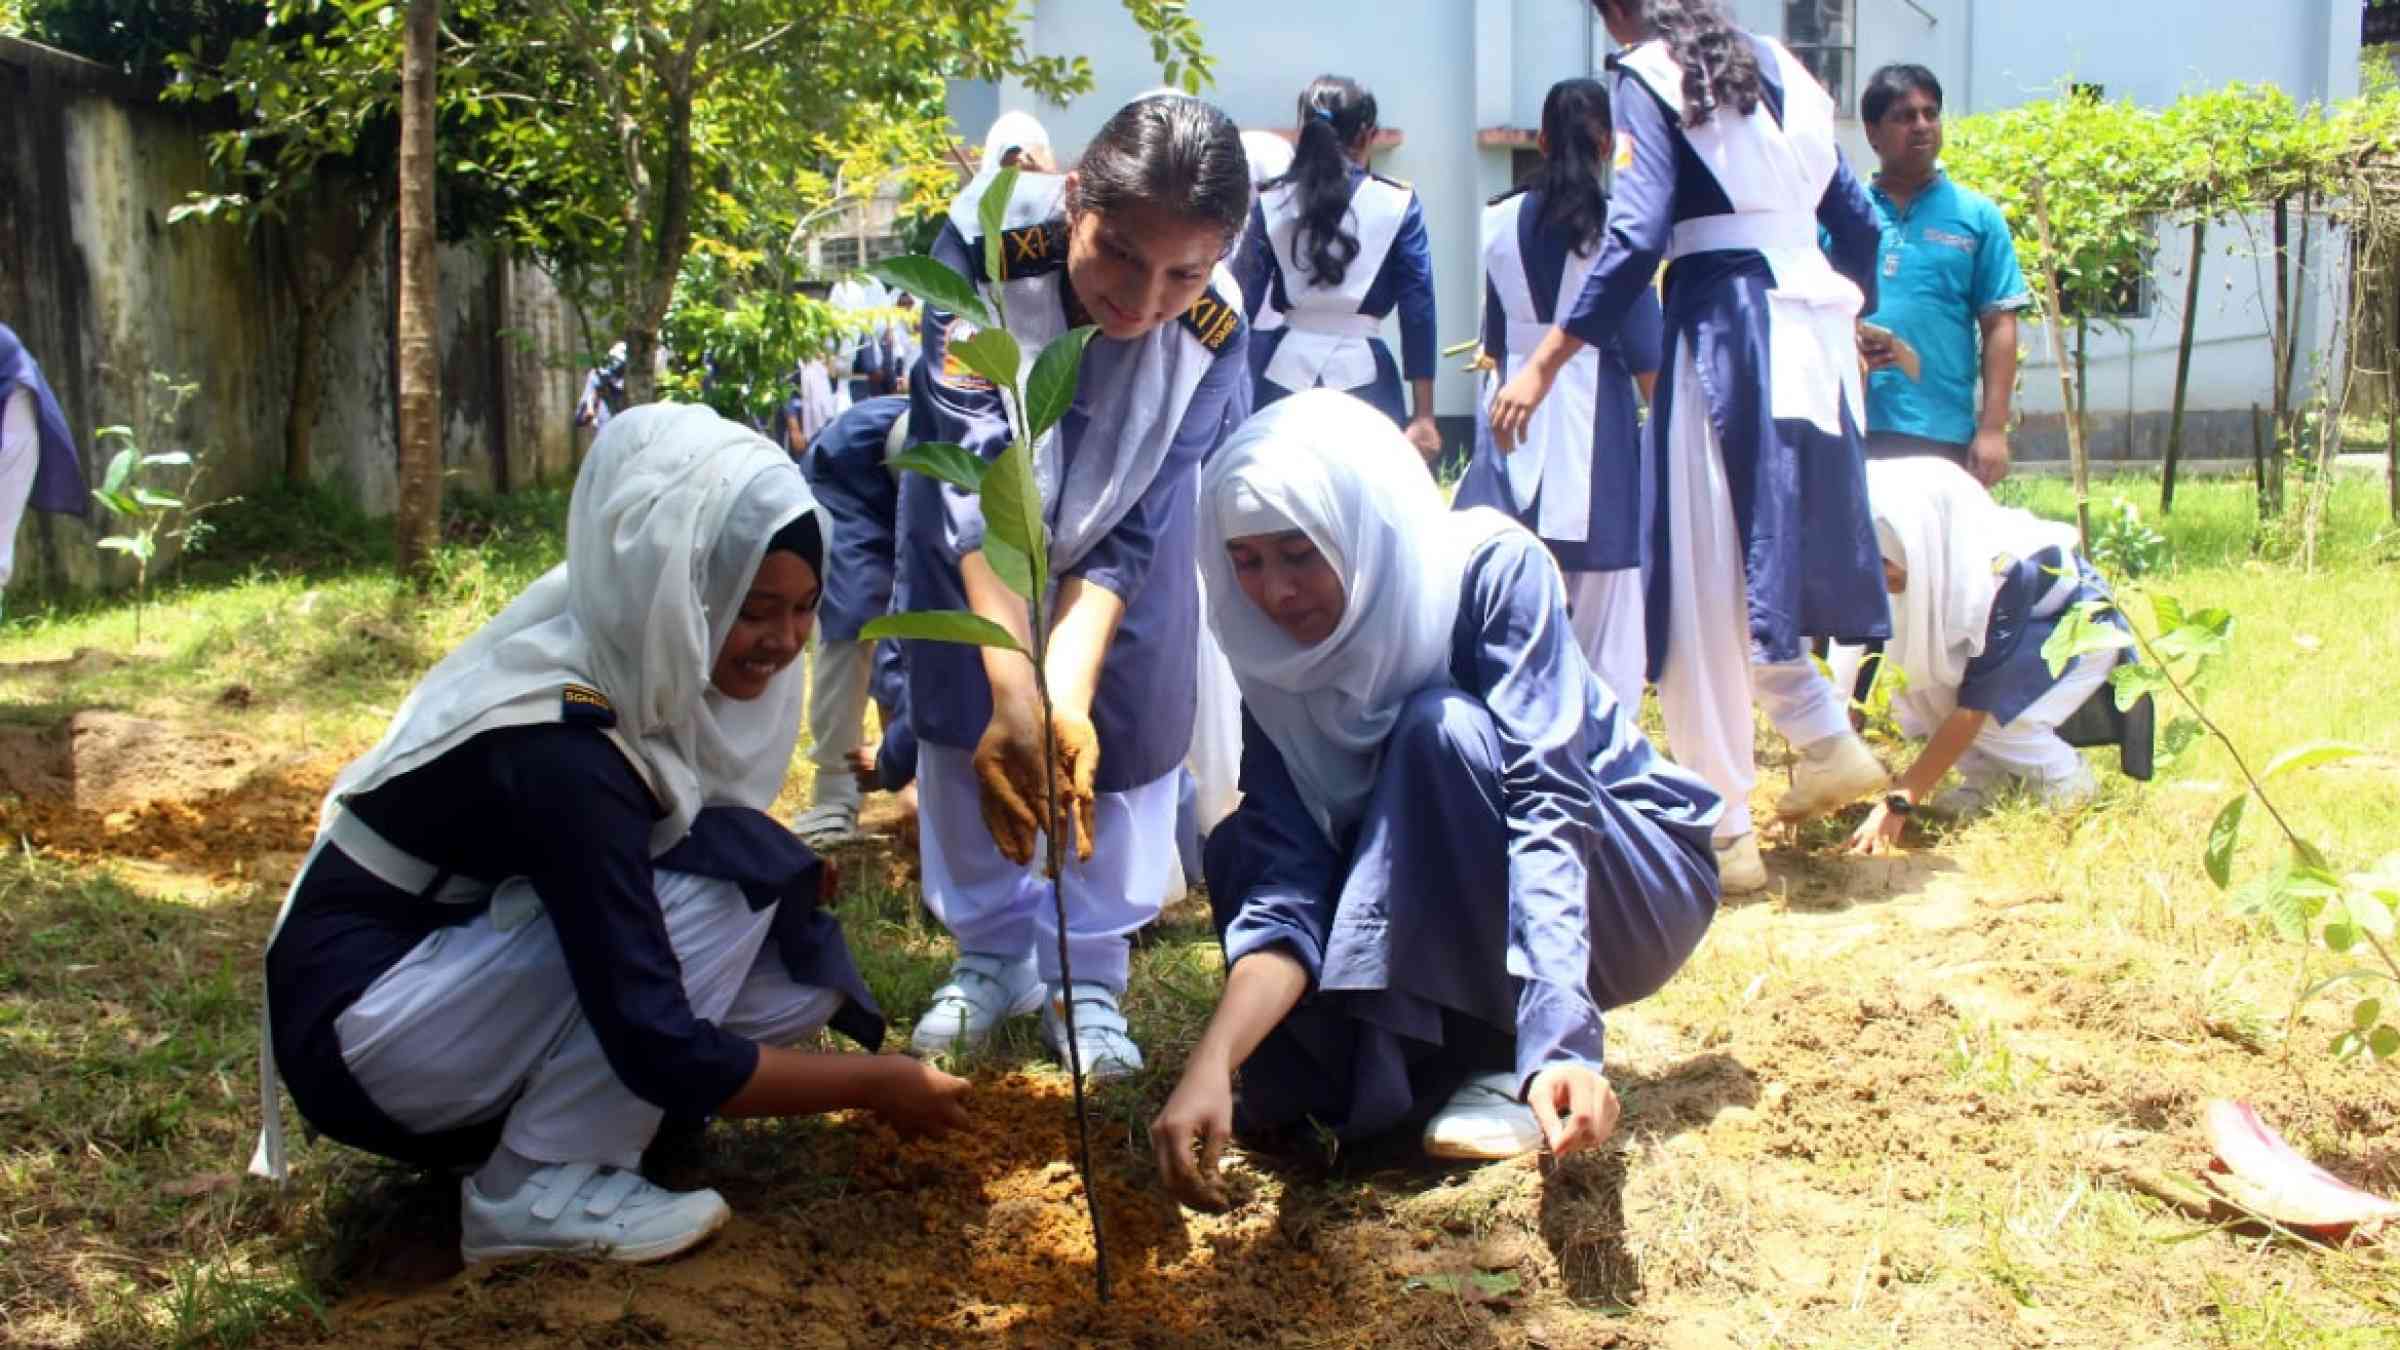 Students are shown planting trees in a school in Sylhet, Bangladesh.